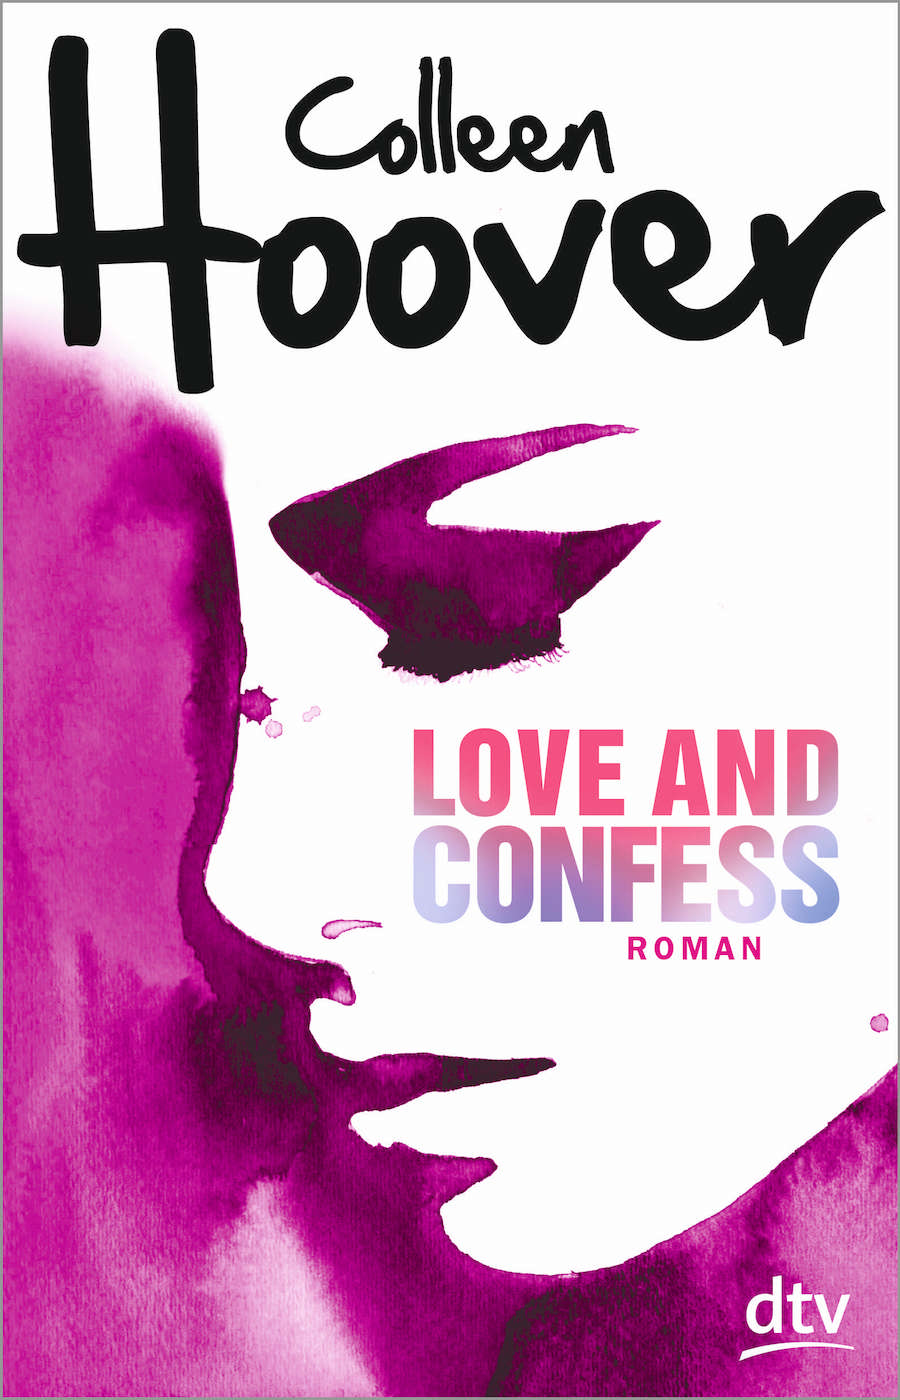 Colleen Hoover - Love and Confess Booklovin.jpg